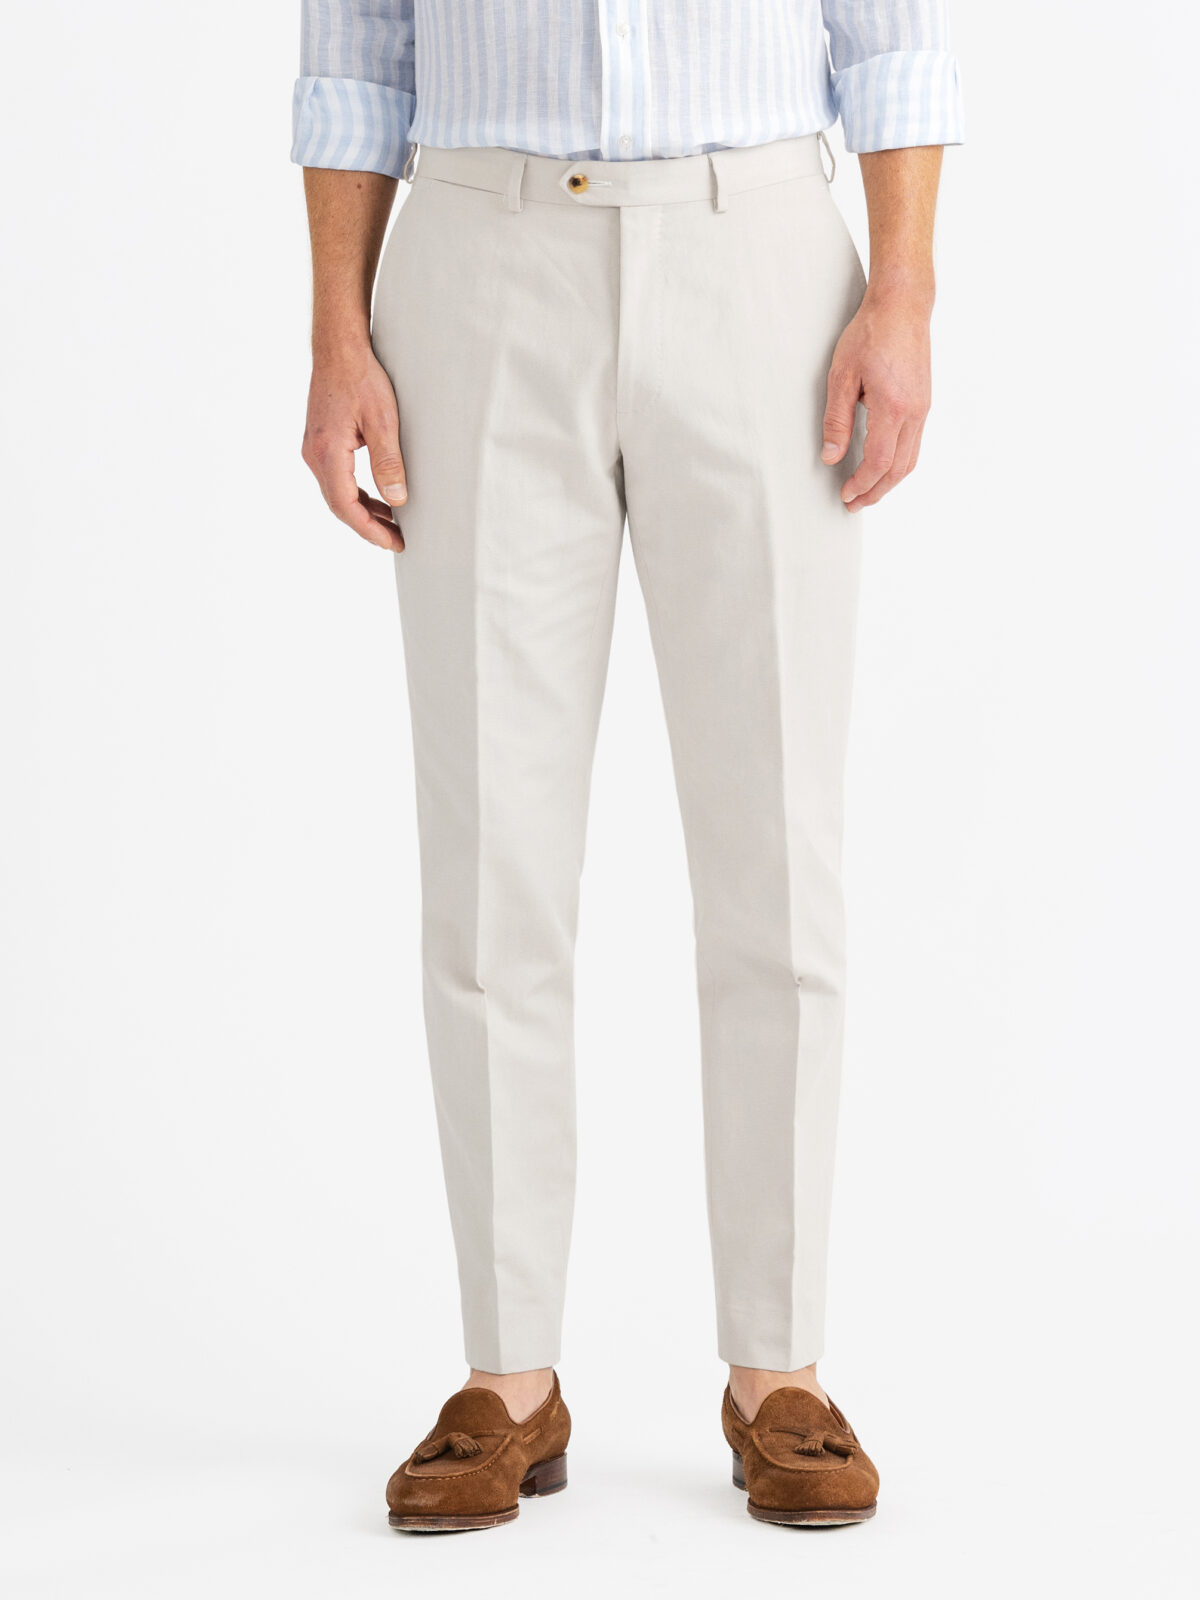 Stone Cotton and Linen Dress Pant - Custom Fit Tailored Clothing